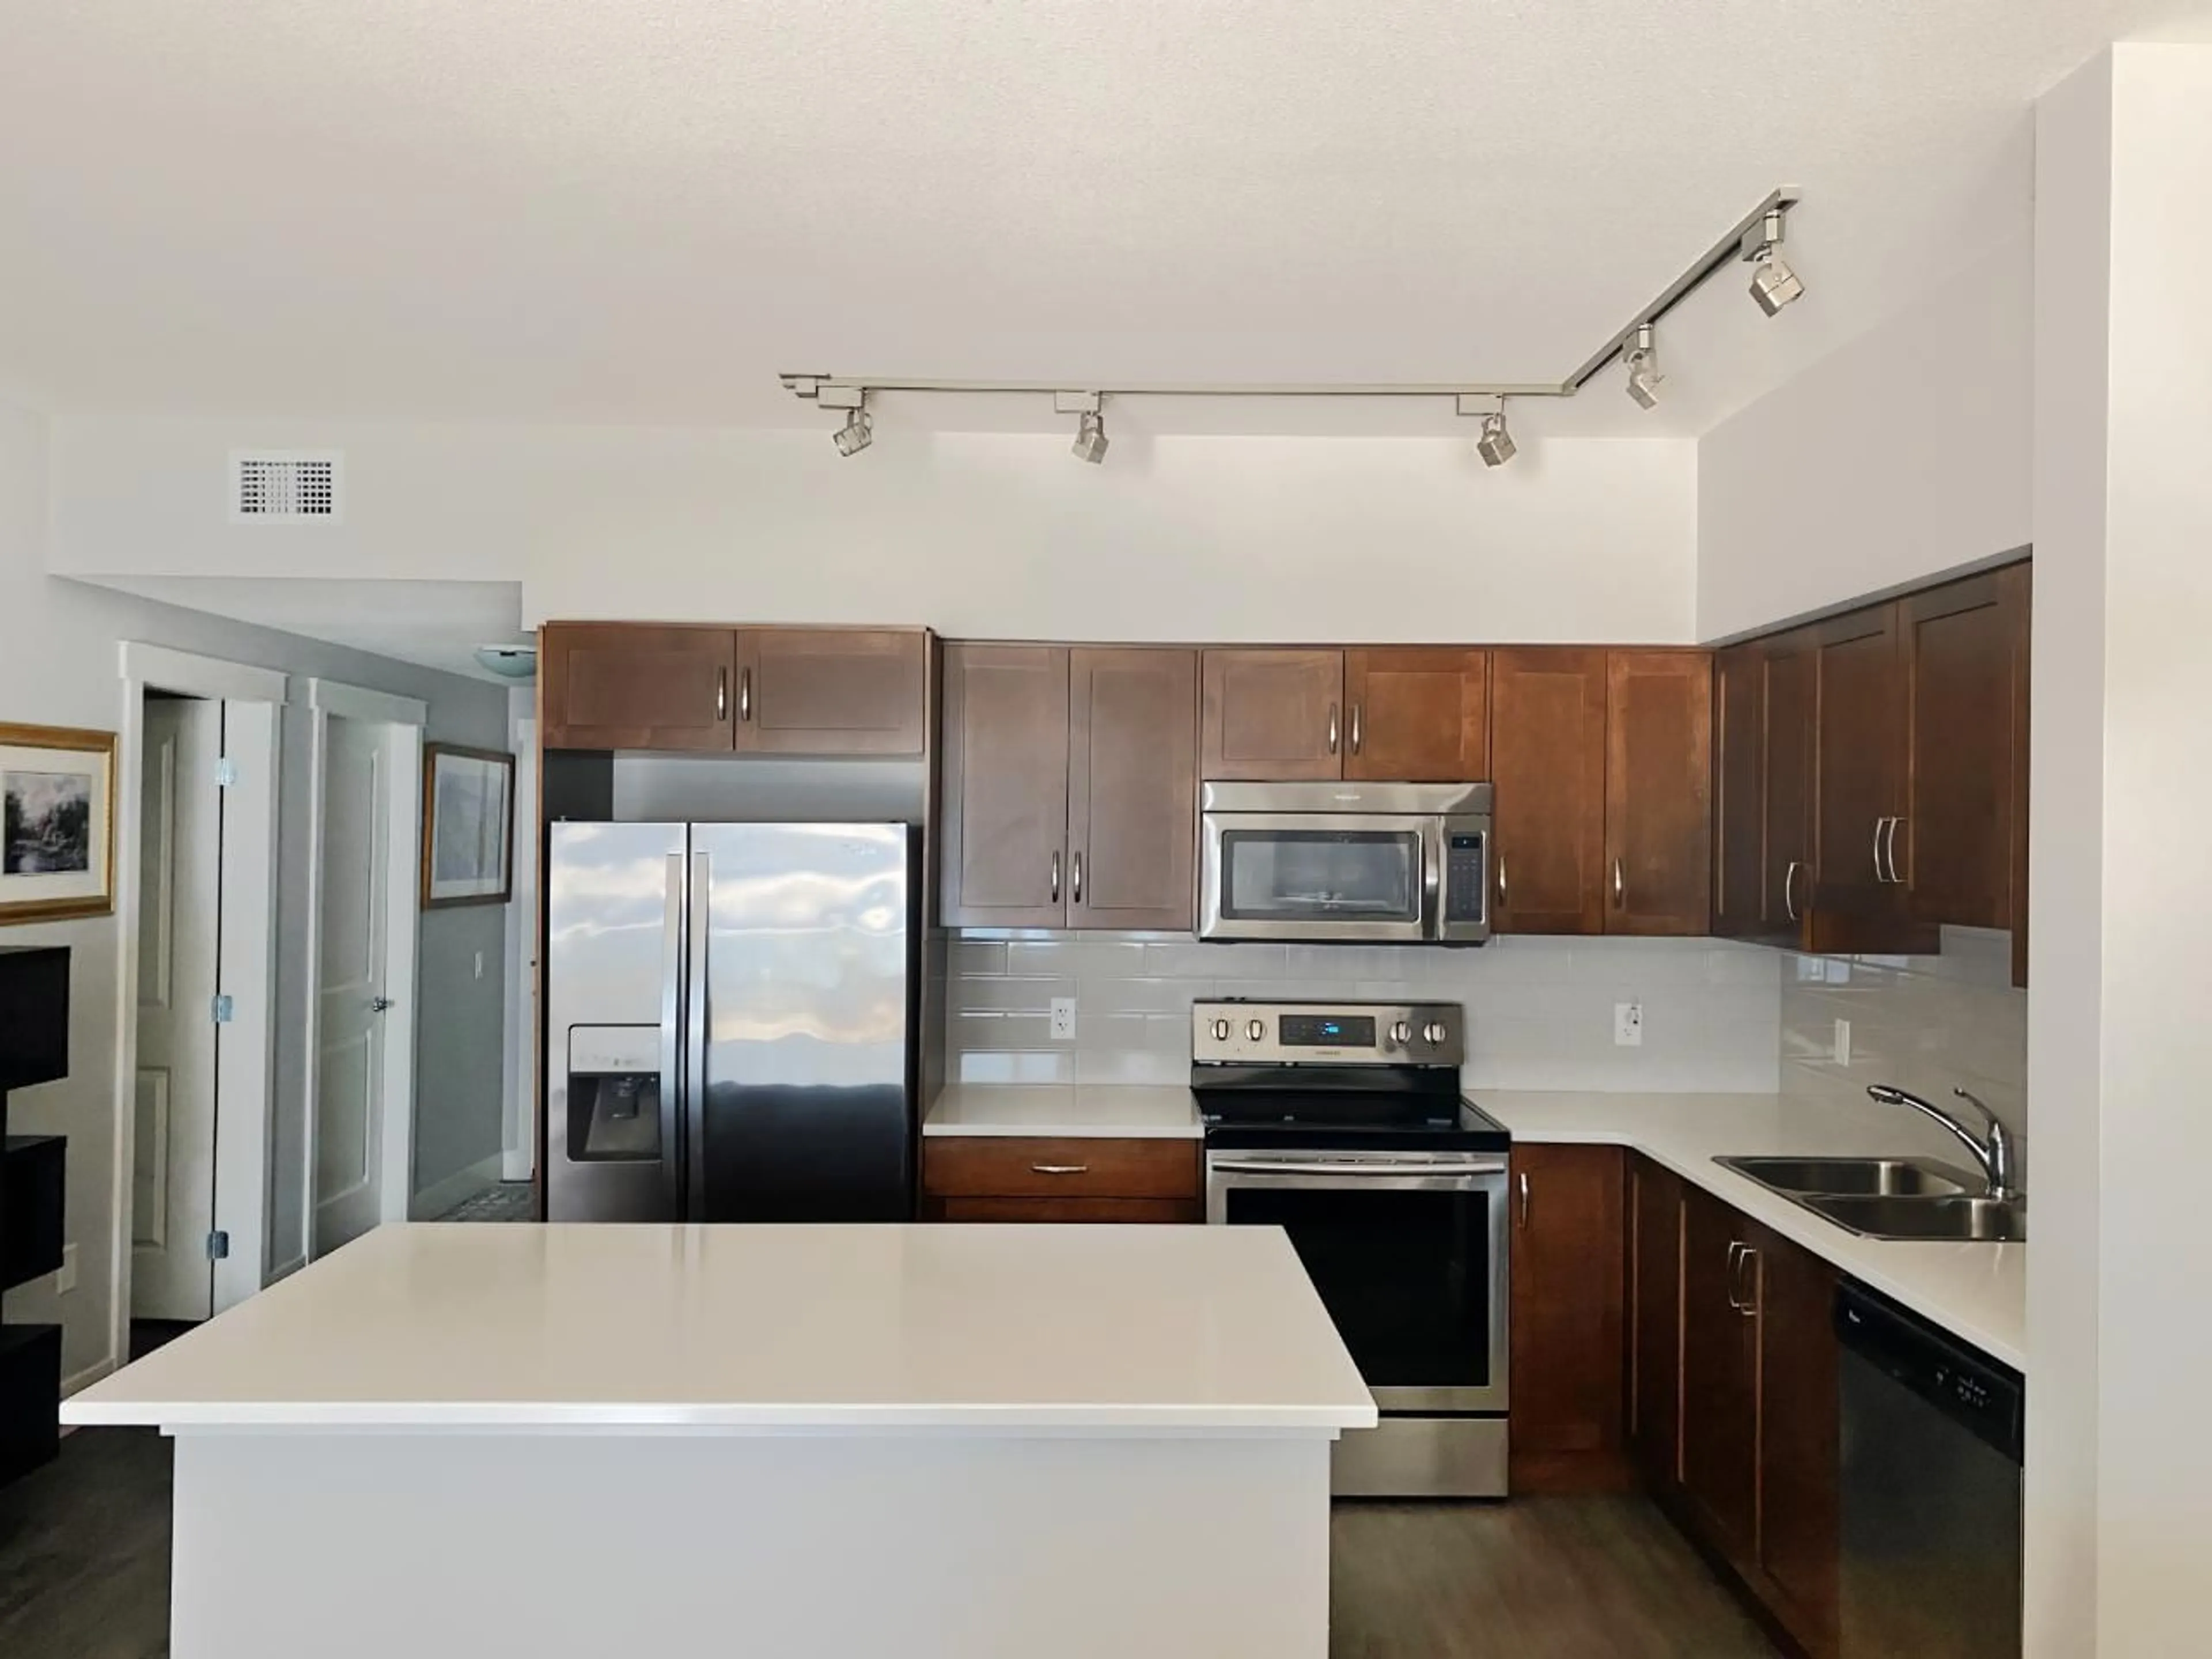 Standard kitchen for 212 - 5570 BROADWATER RD, Robson British Columbia V1N0A1